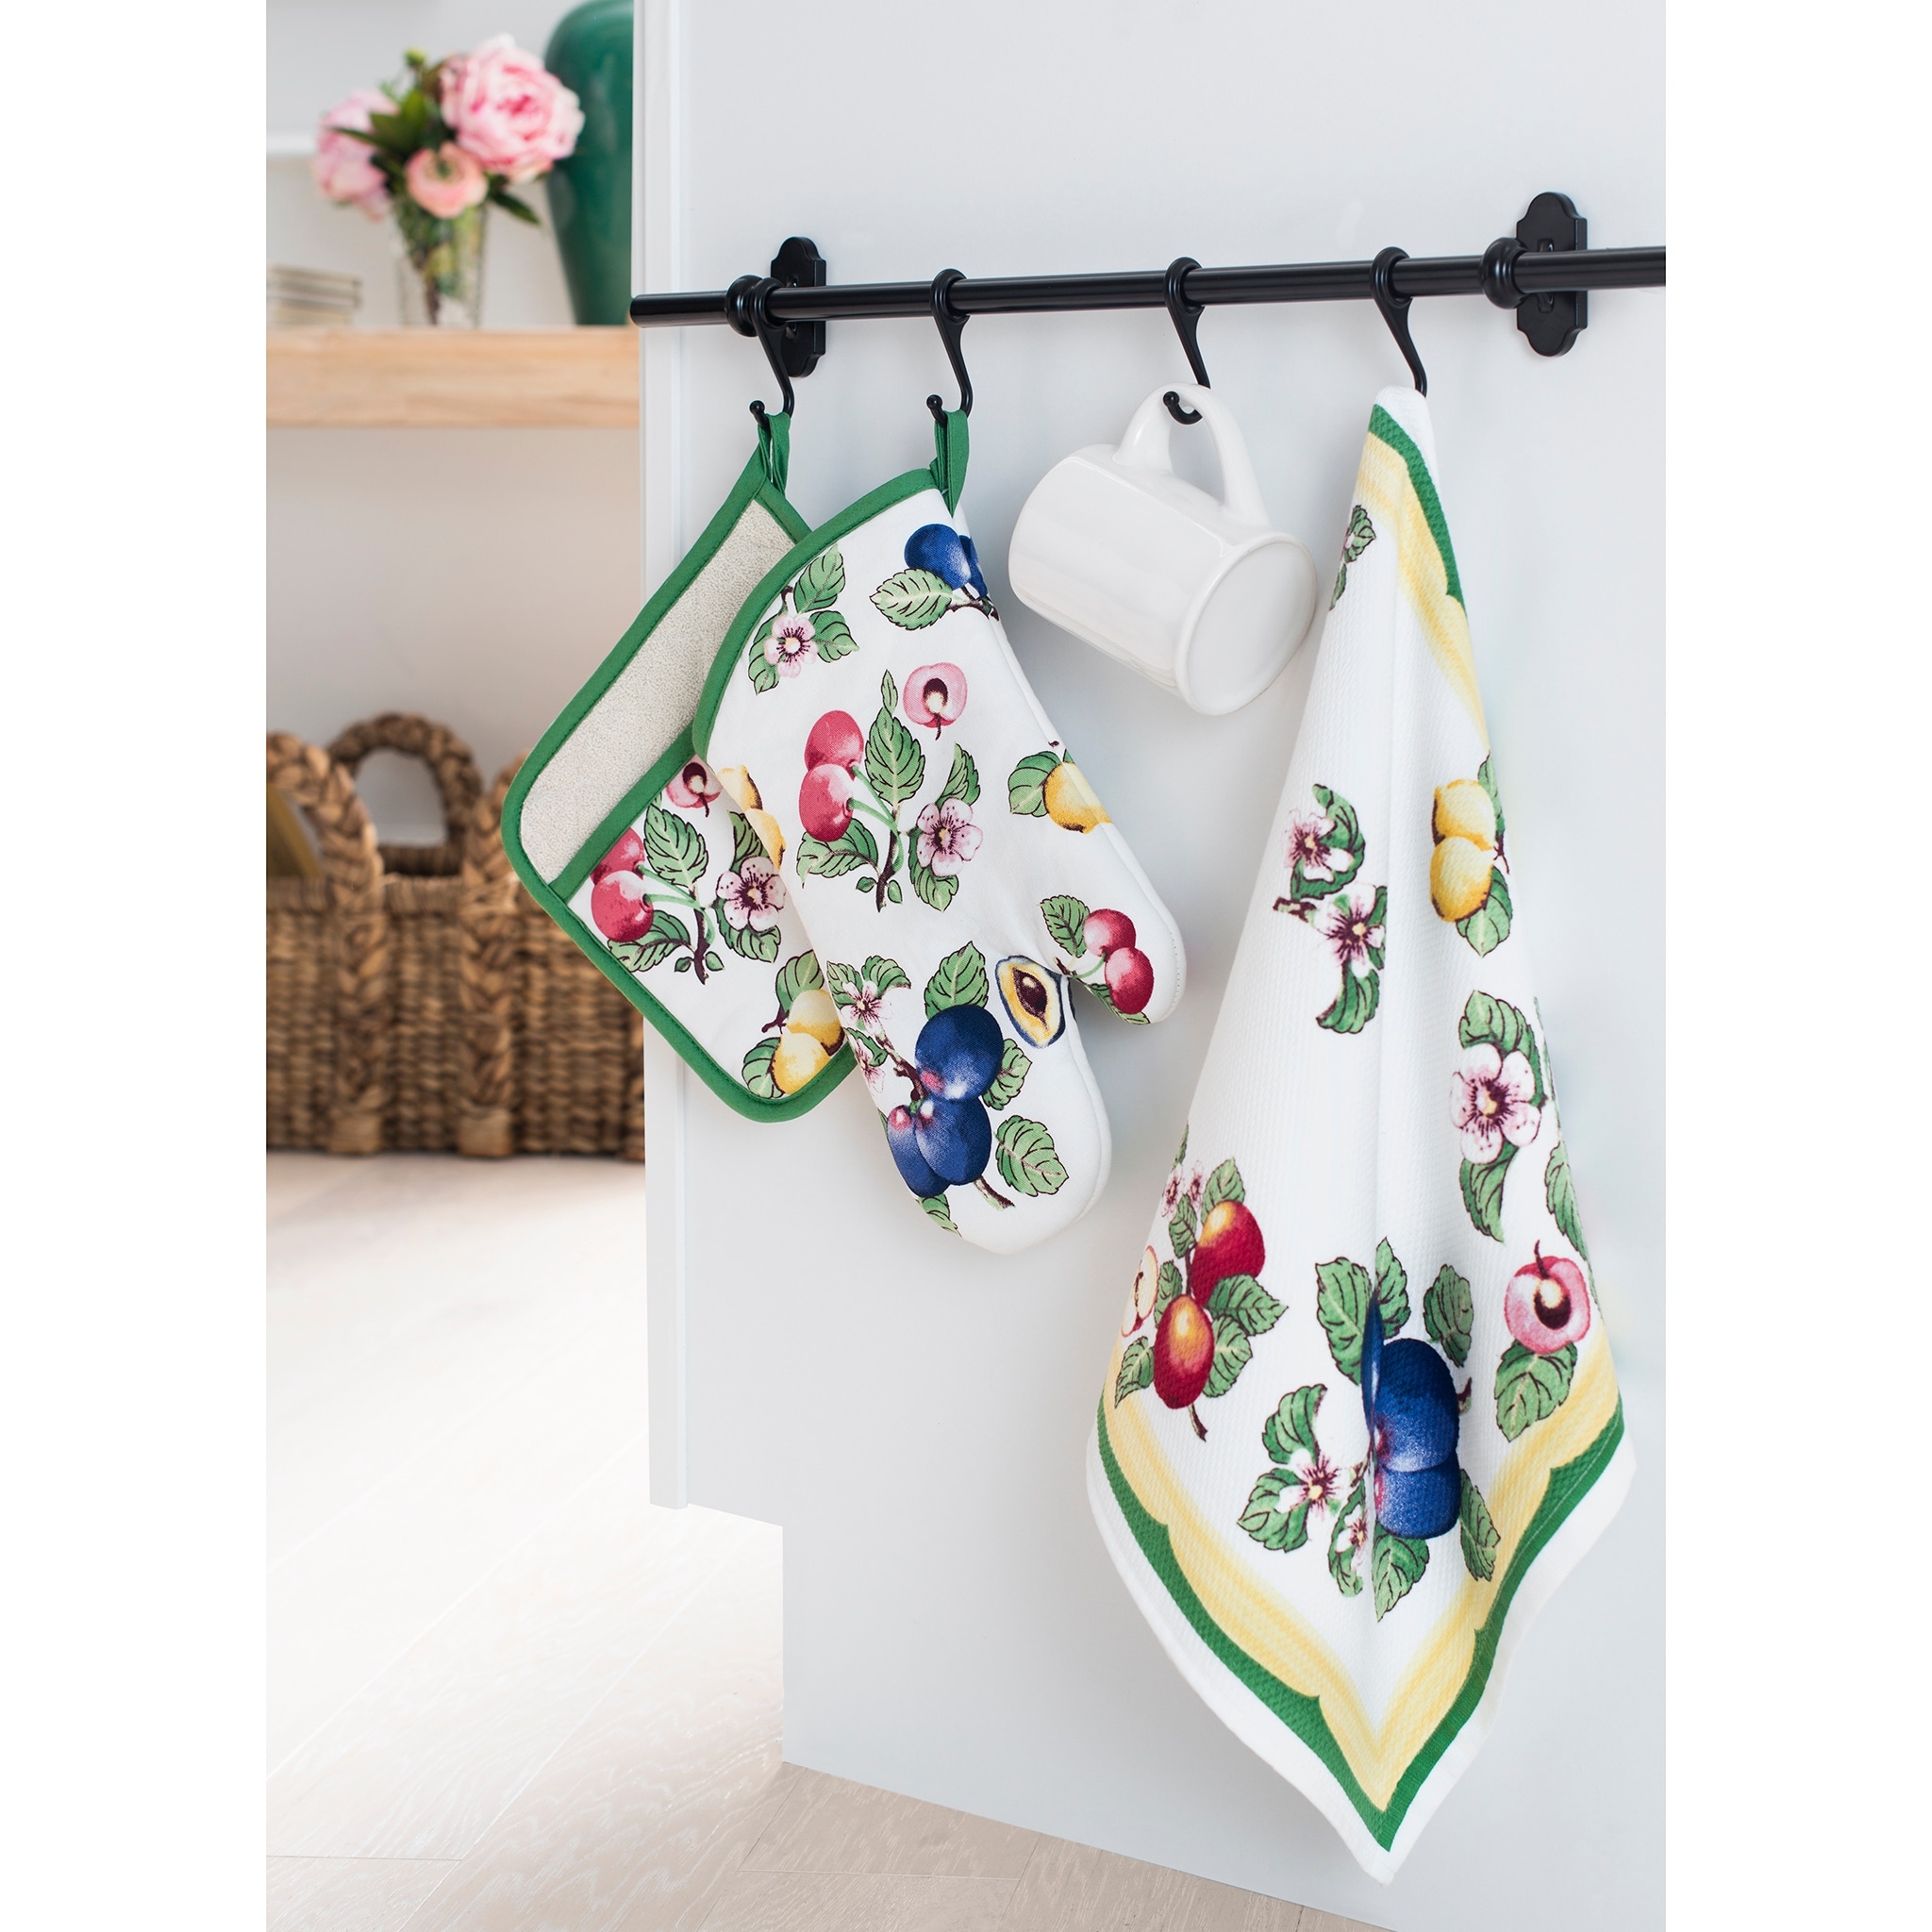 https://ak1.ostkcdn.com/images/products/is/images/direct/3818bd7d3c0daff62836cf5cbf30e9fa871b6936/Villeroy-and-Boch-French-Garden-Kitchen-Towel%2C-Set-of-2.jpg